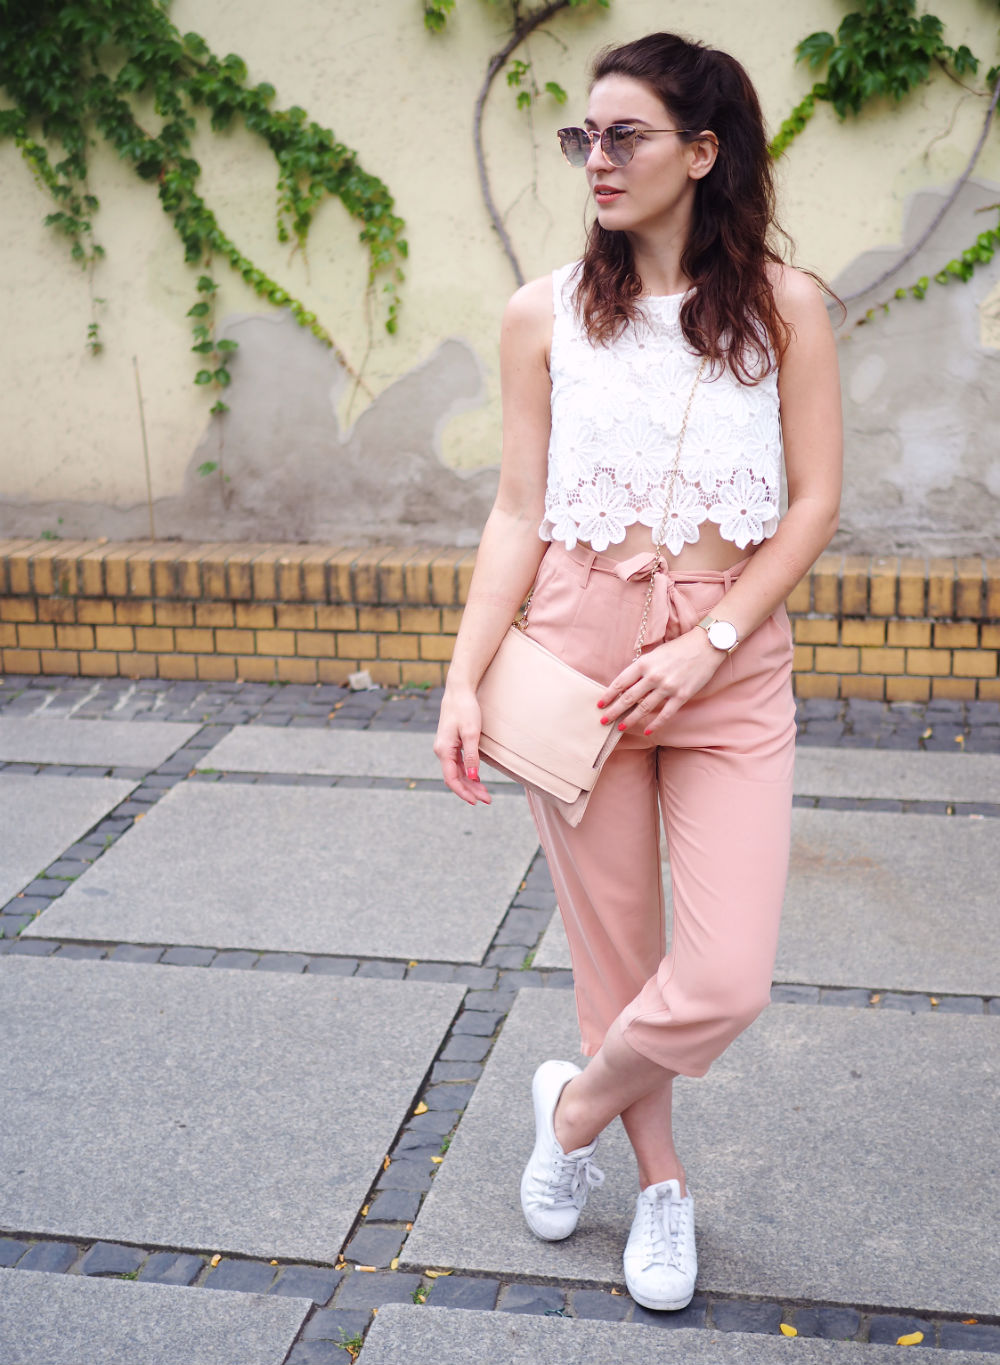 blush culottes adidas superstars streetstyle oasis cluse watch summer look berlin fashion week quay all my love